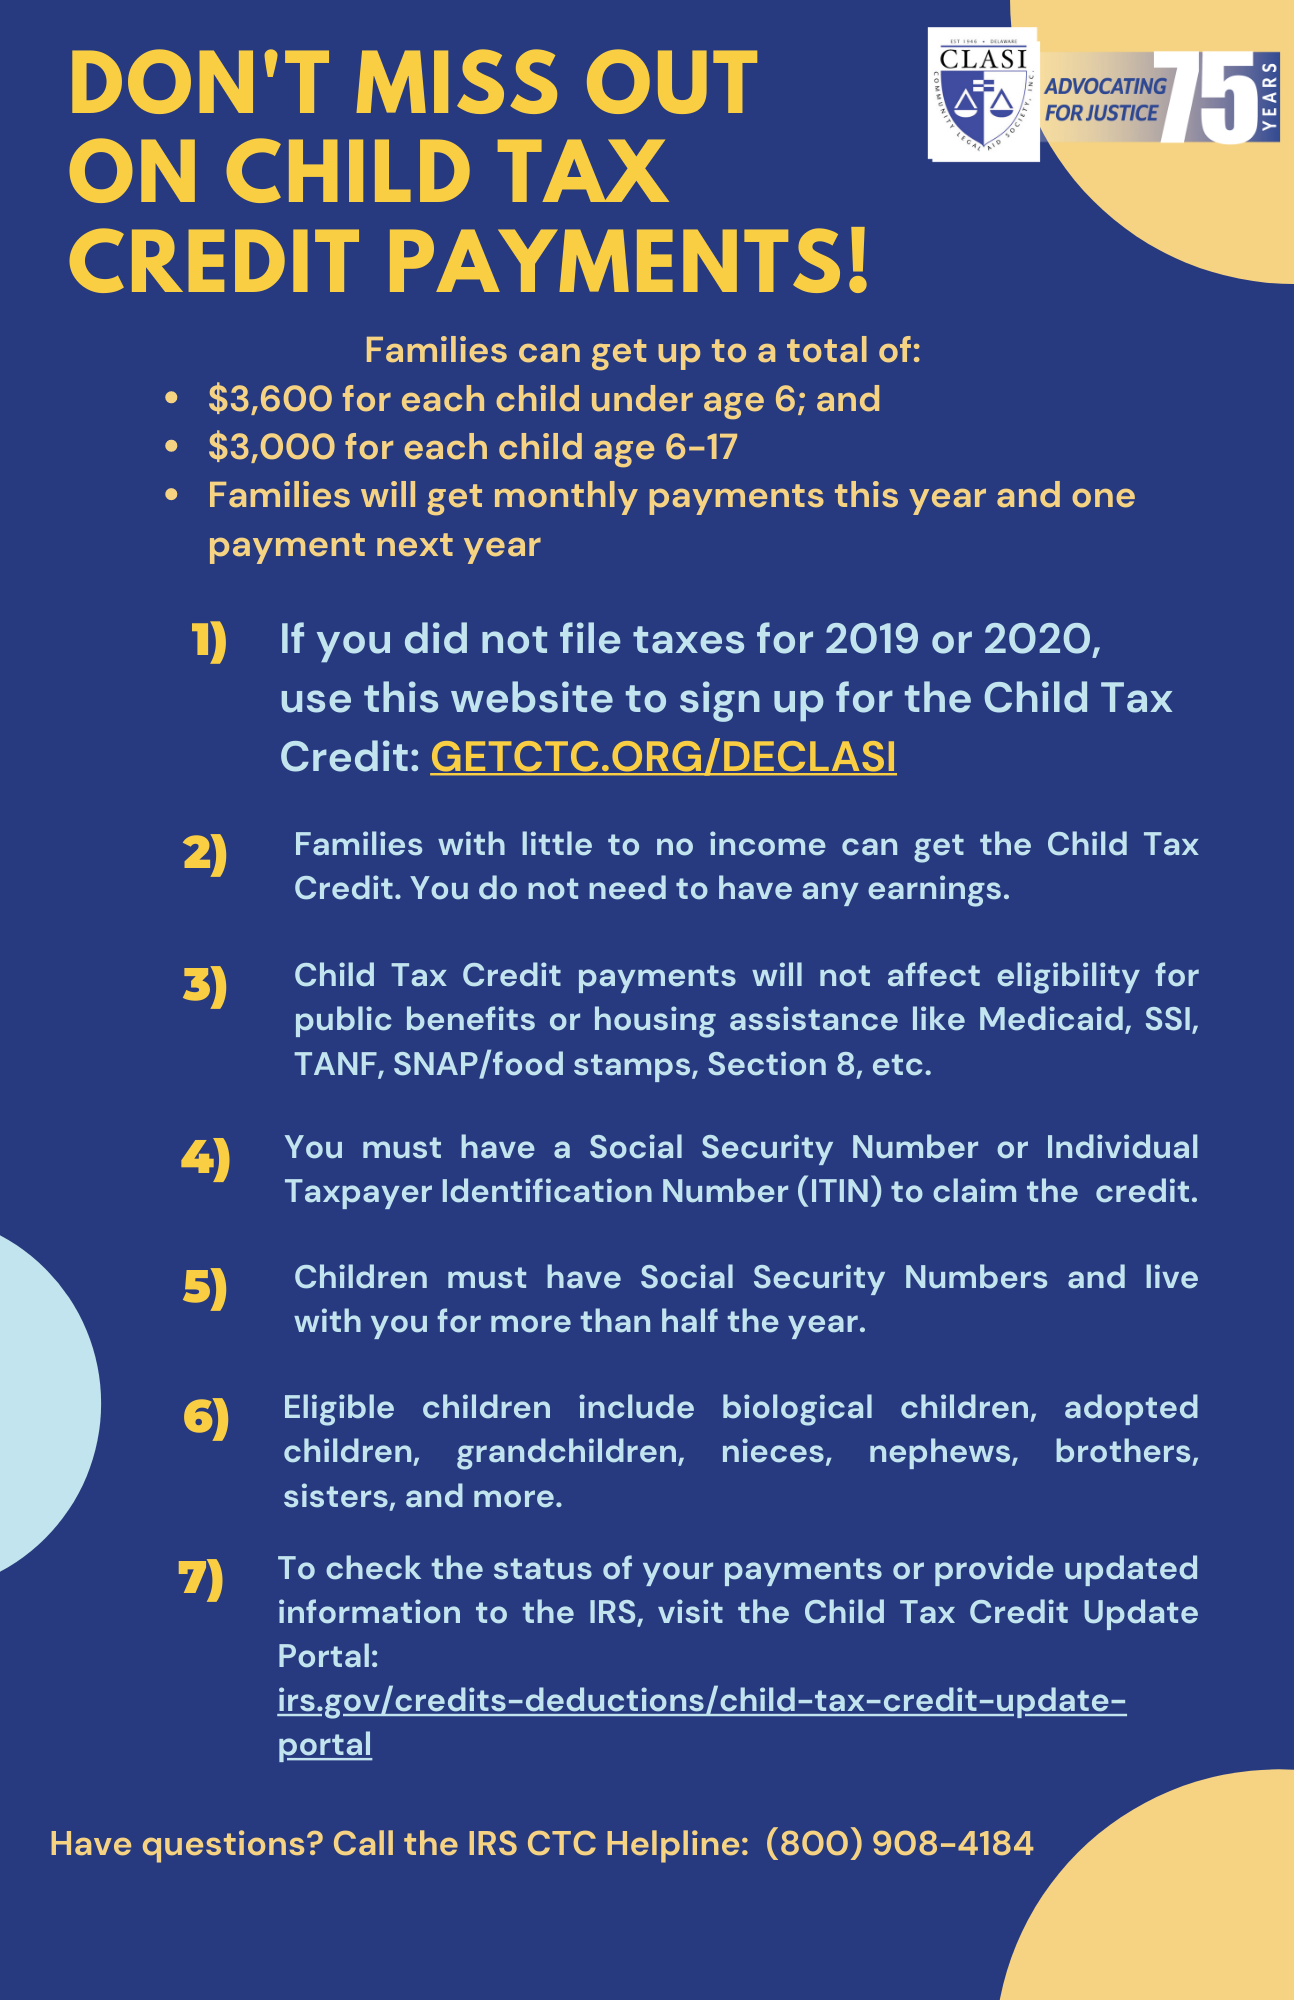 Don't Miss out on Child Tax Credit Payments! Families can get up to a total of $3,600 for each child under age 6; and $3,000 for each child age 6-17. If you did not file taxes for 2019 or 2020, use this website to sign up for the child tax credit: getctc.org/declasi